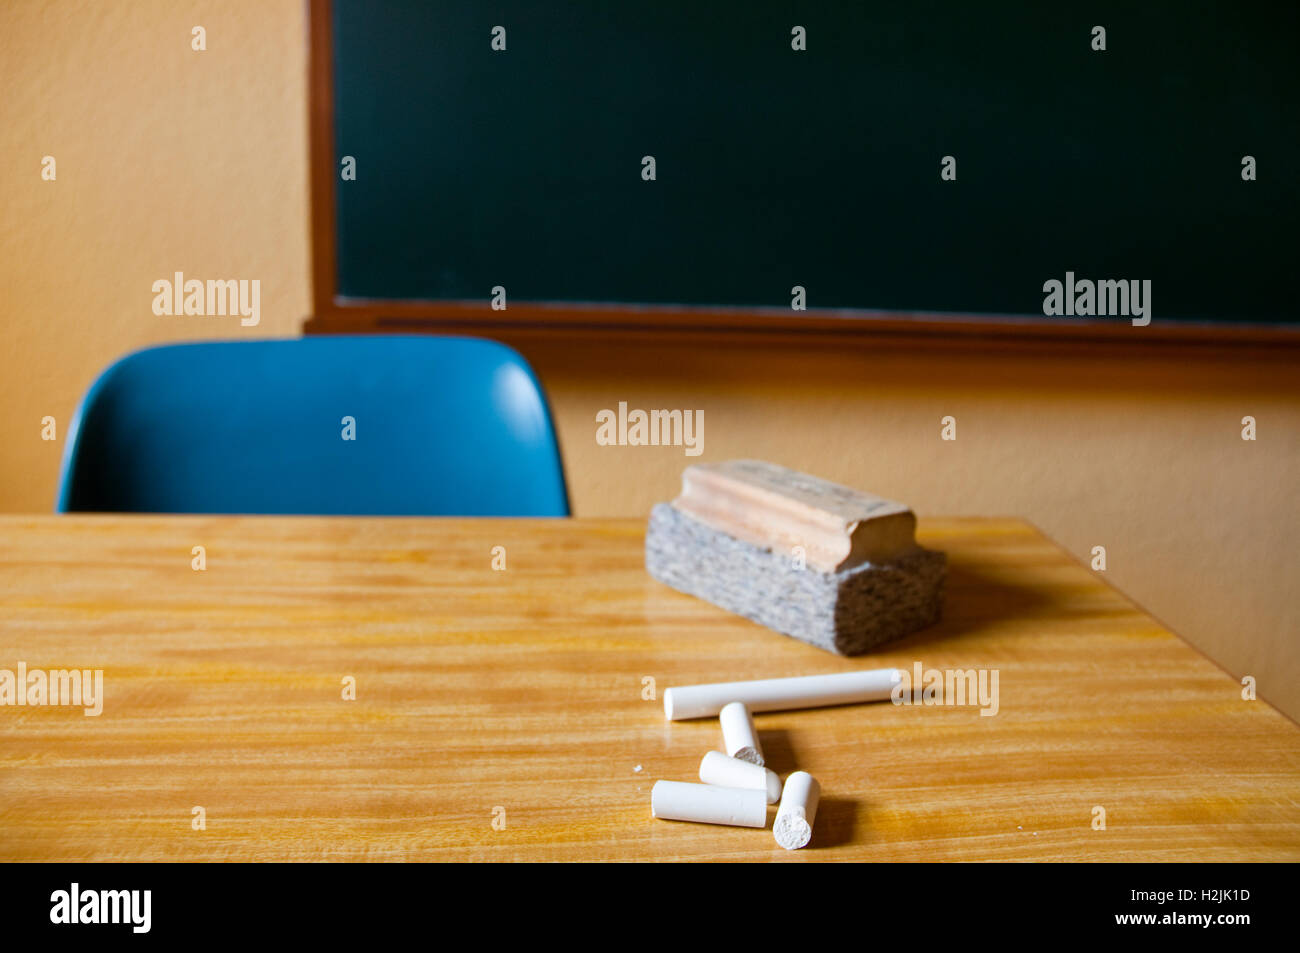 Chalks and board duster on teacher's table. Stock Photo